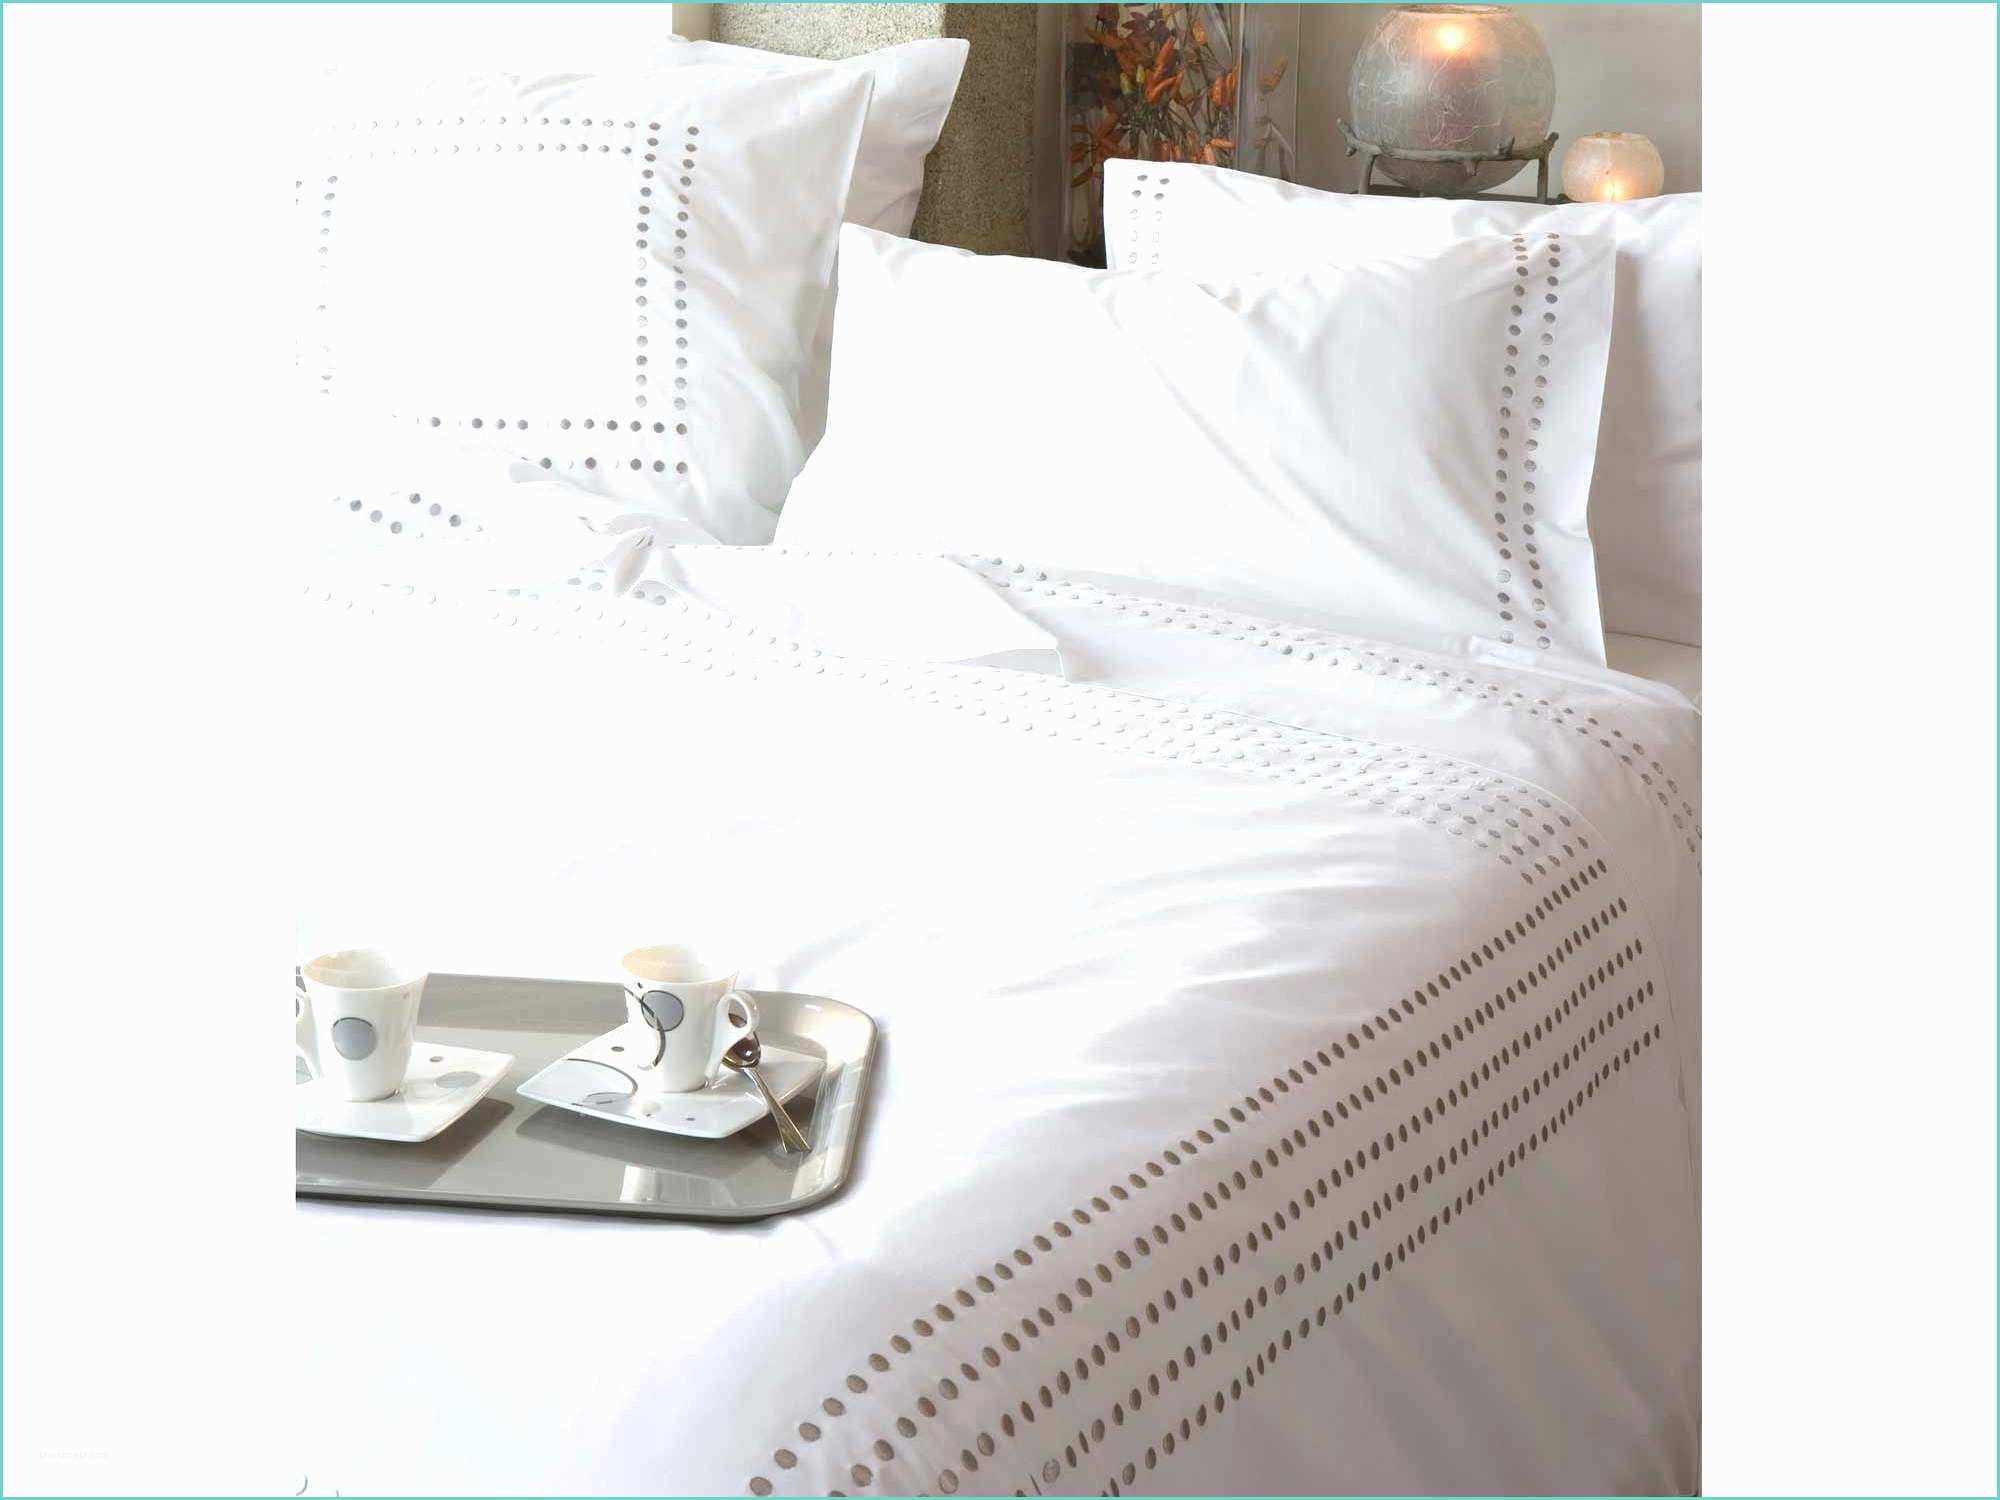 Housse De Couette Blanche Broderie Anglaise Housse De Couette Broderie Anglaise Avec Housse De Couette